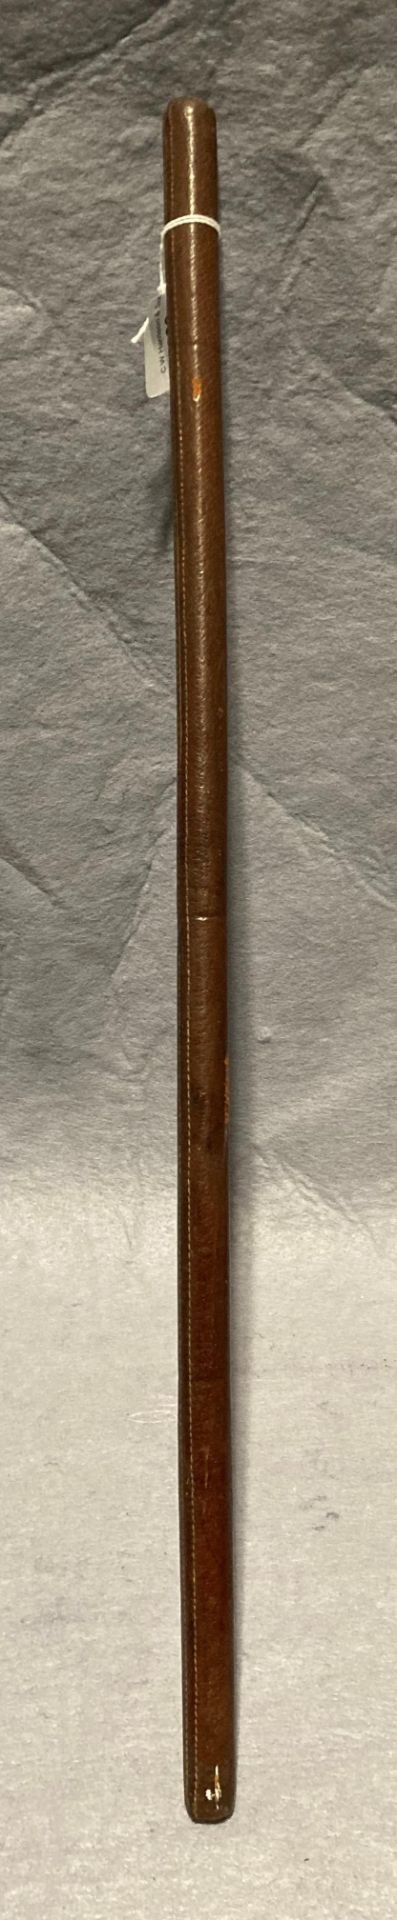 Brown leather-bound swagger/military stick, 61.